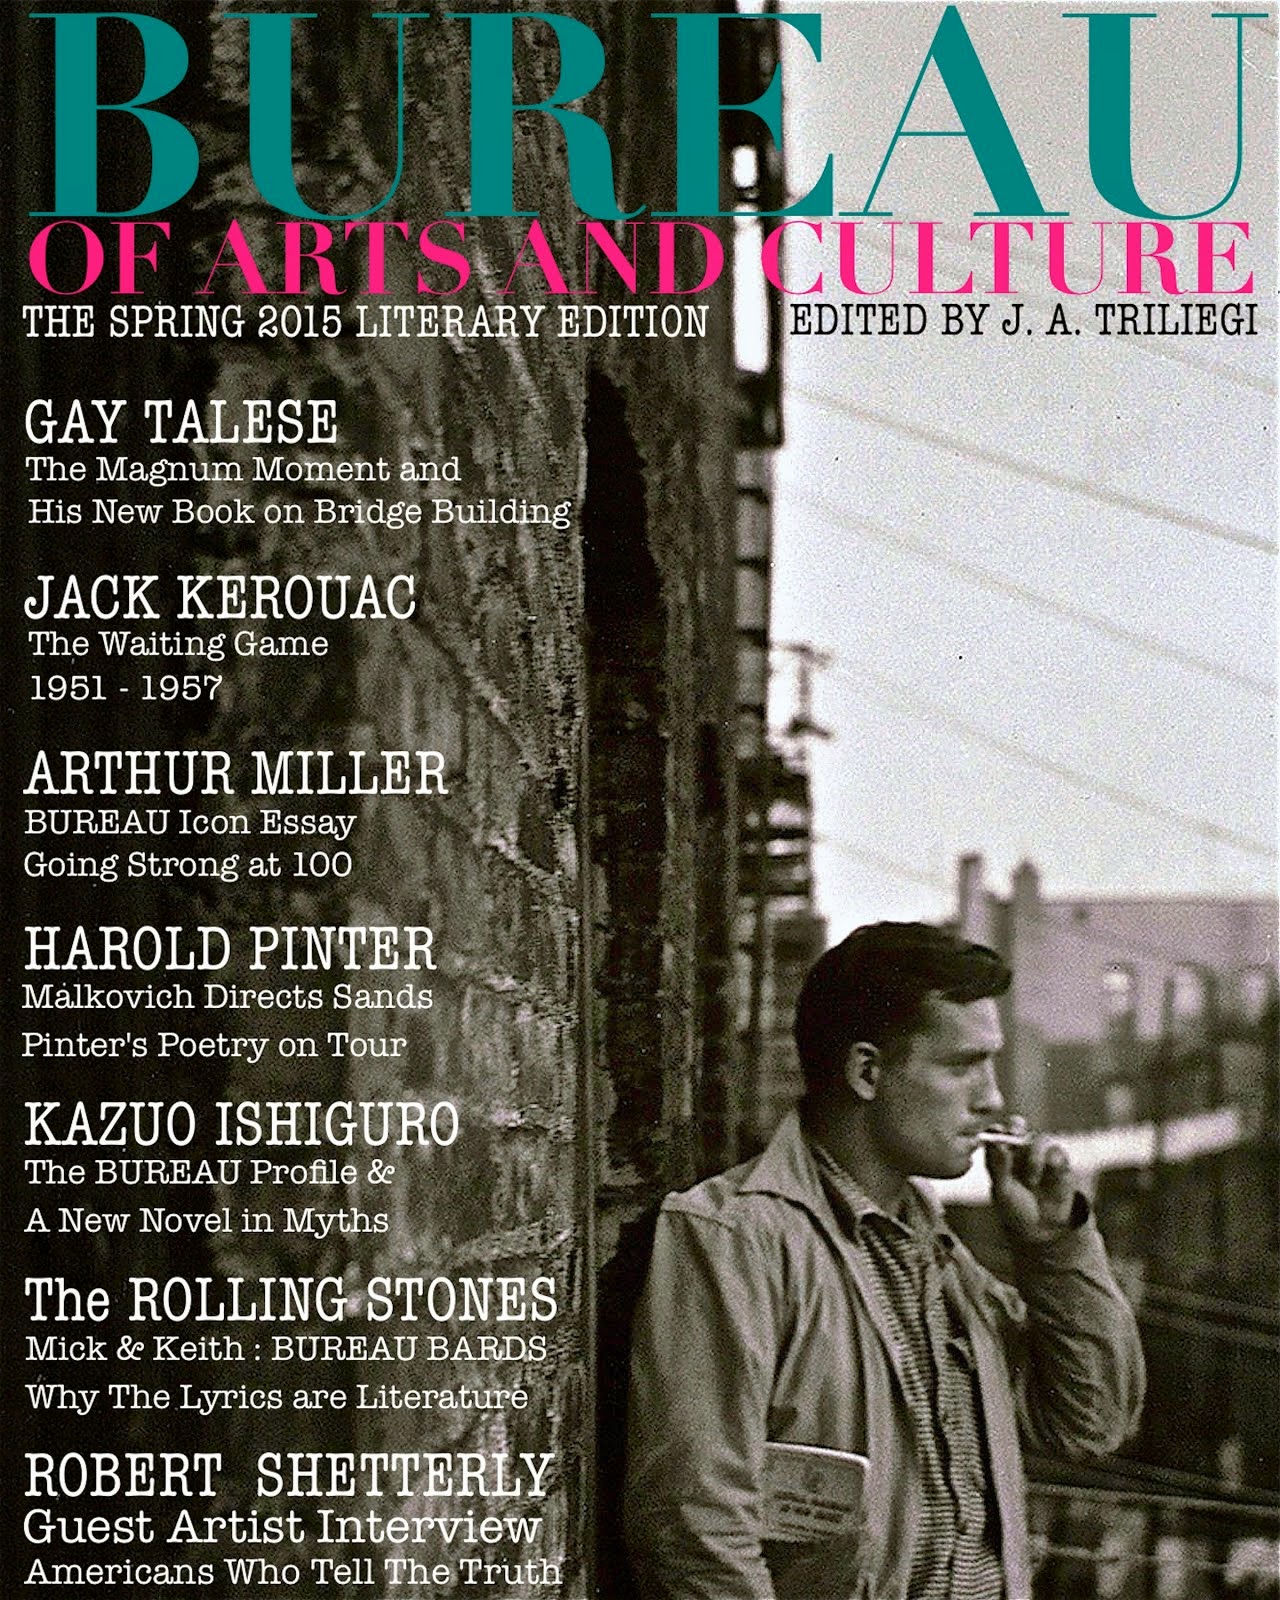 2015 LITERARY EDITION BUREAU OF ARTS + CULTURE TAP TO DOWNLOAD FREE !